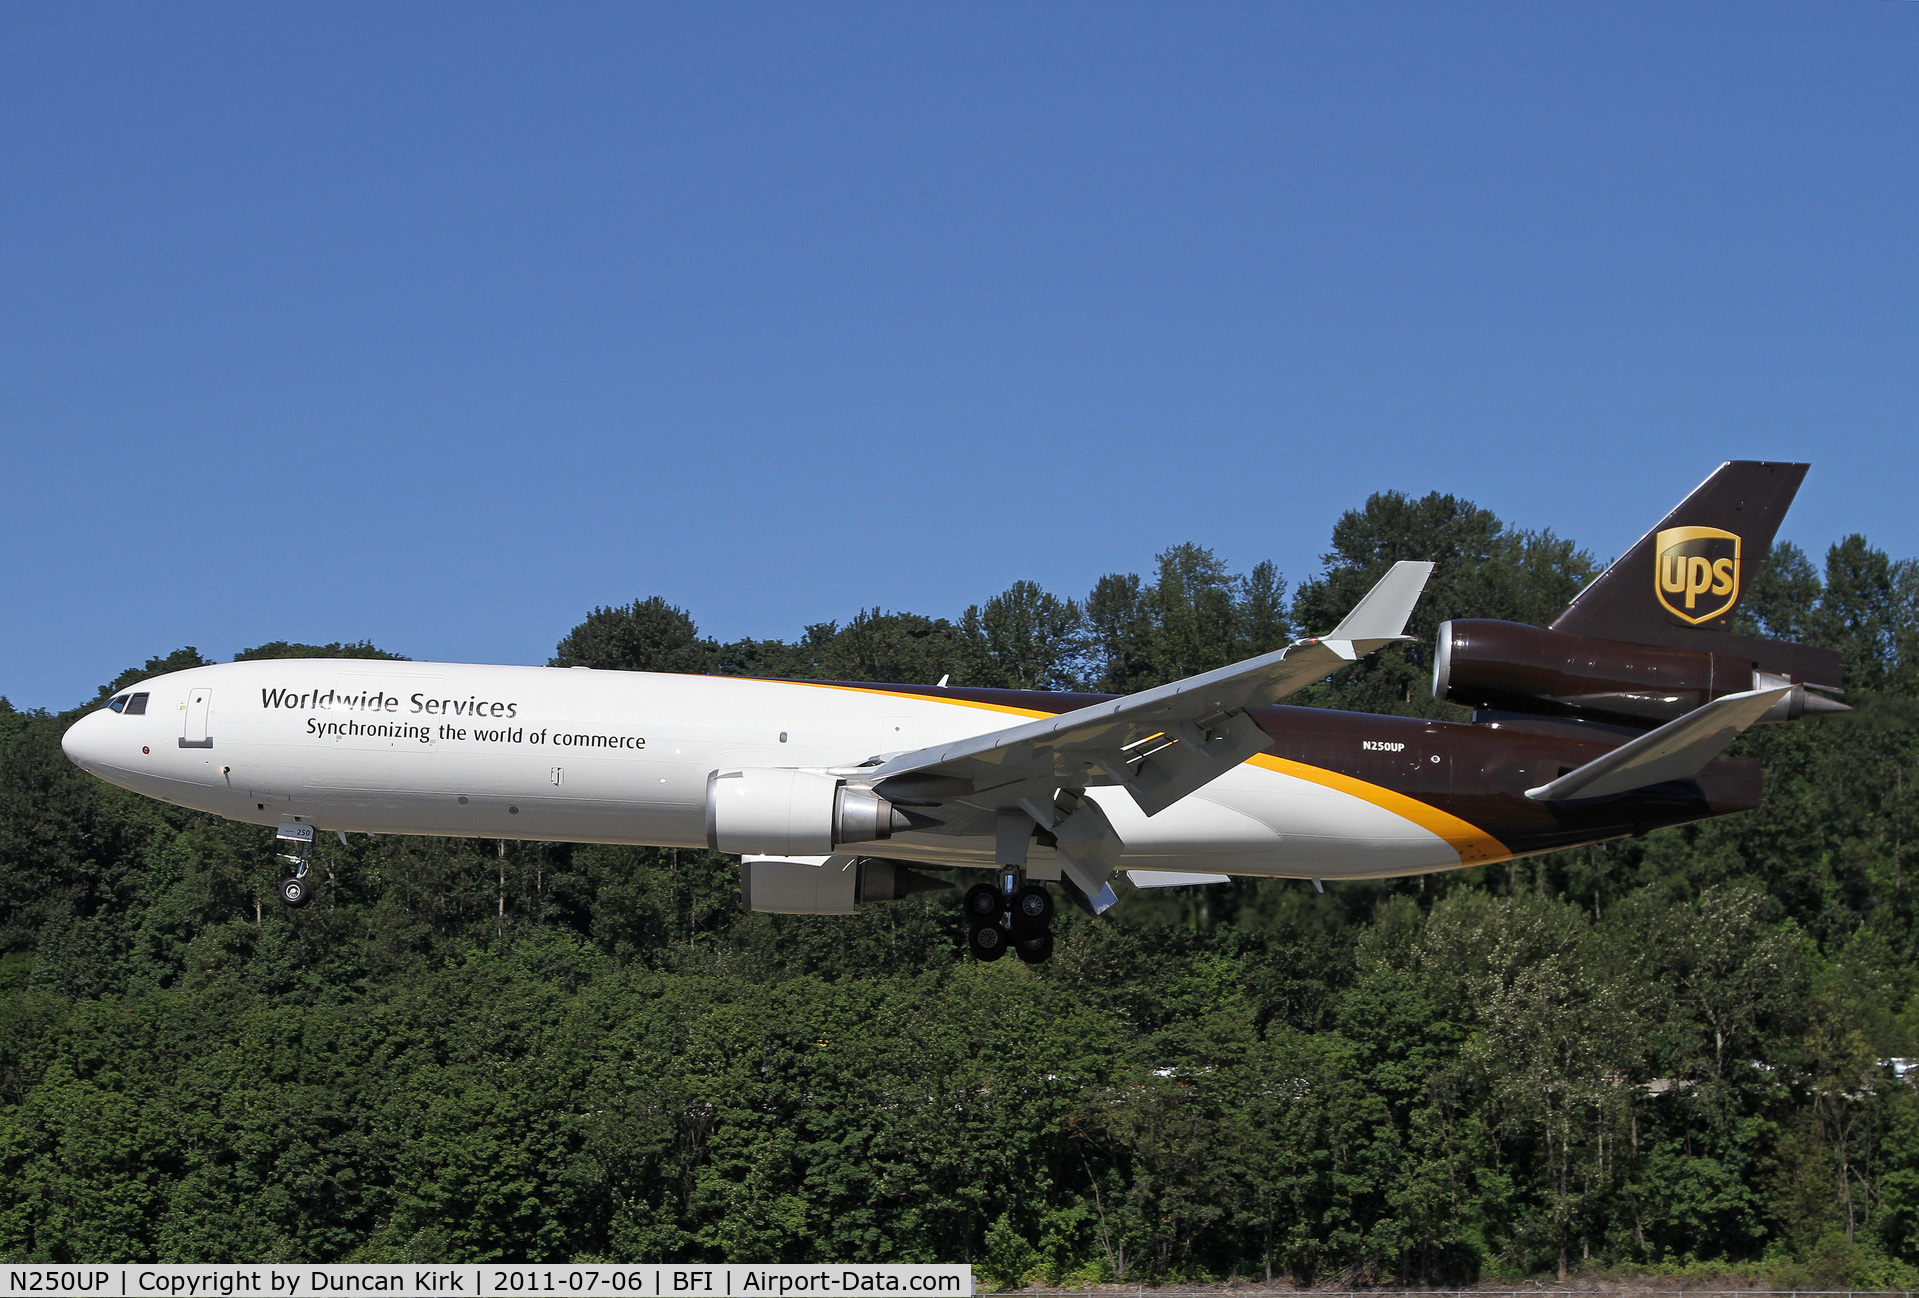 N250UP, 1995 McDonnell Douglas MD-11F C/N 48745, Recently back in the mix of UPS types at BFI